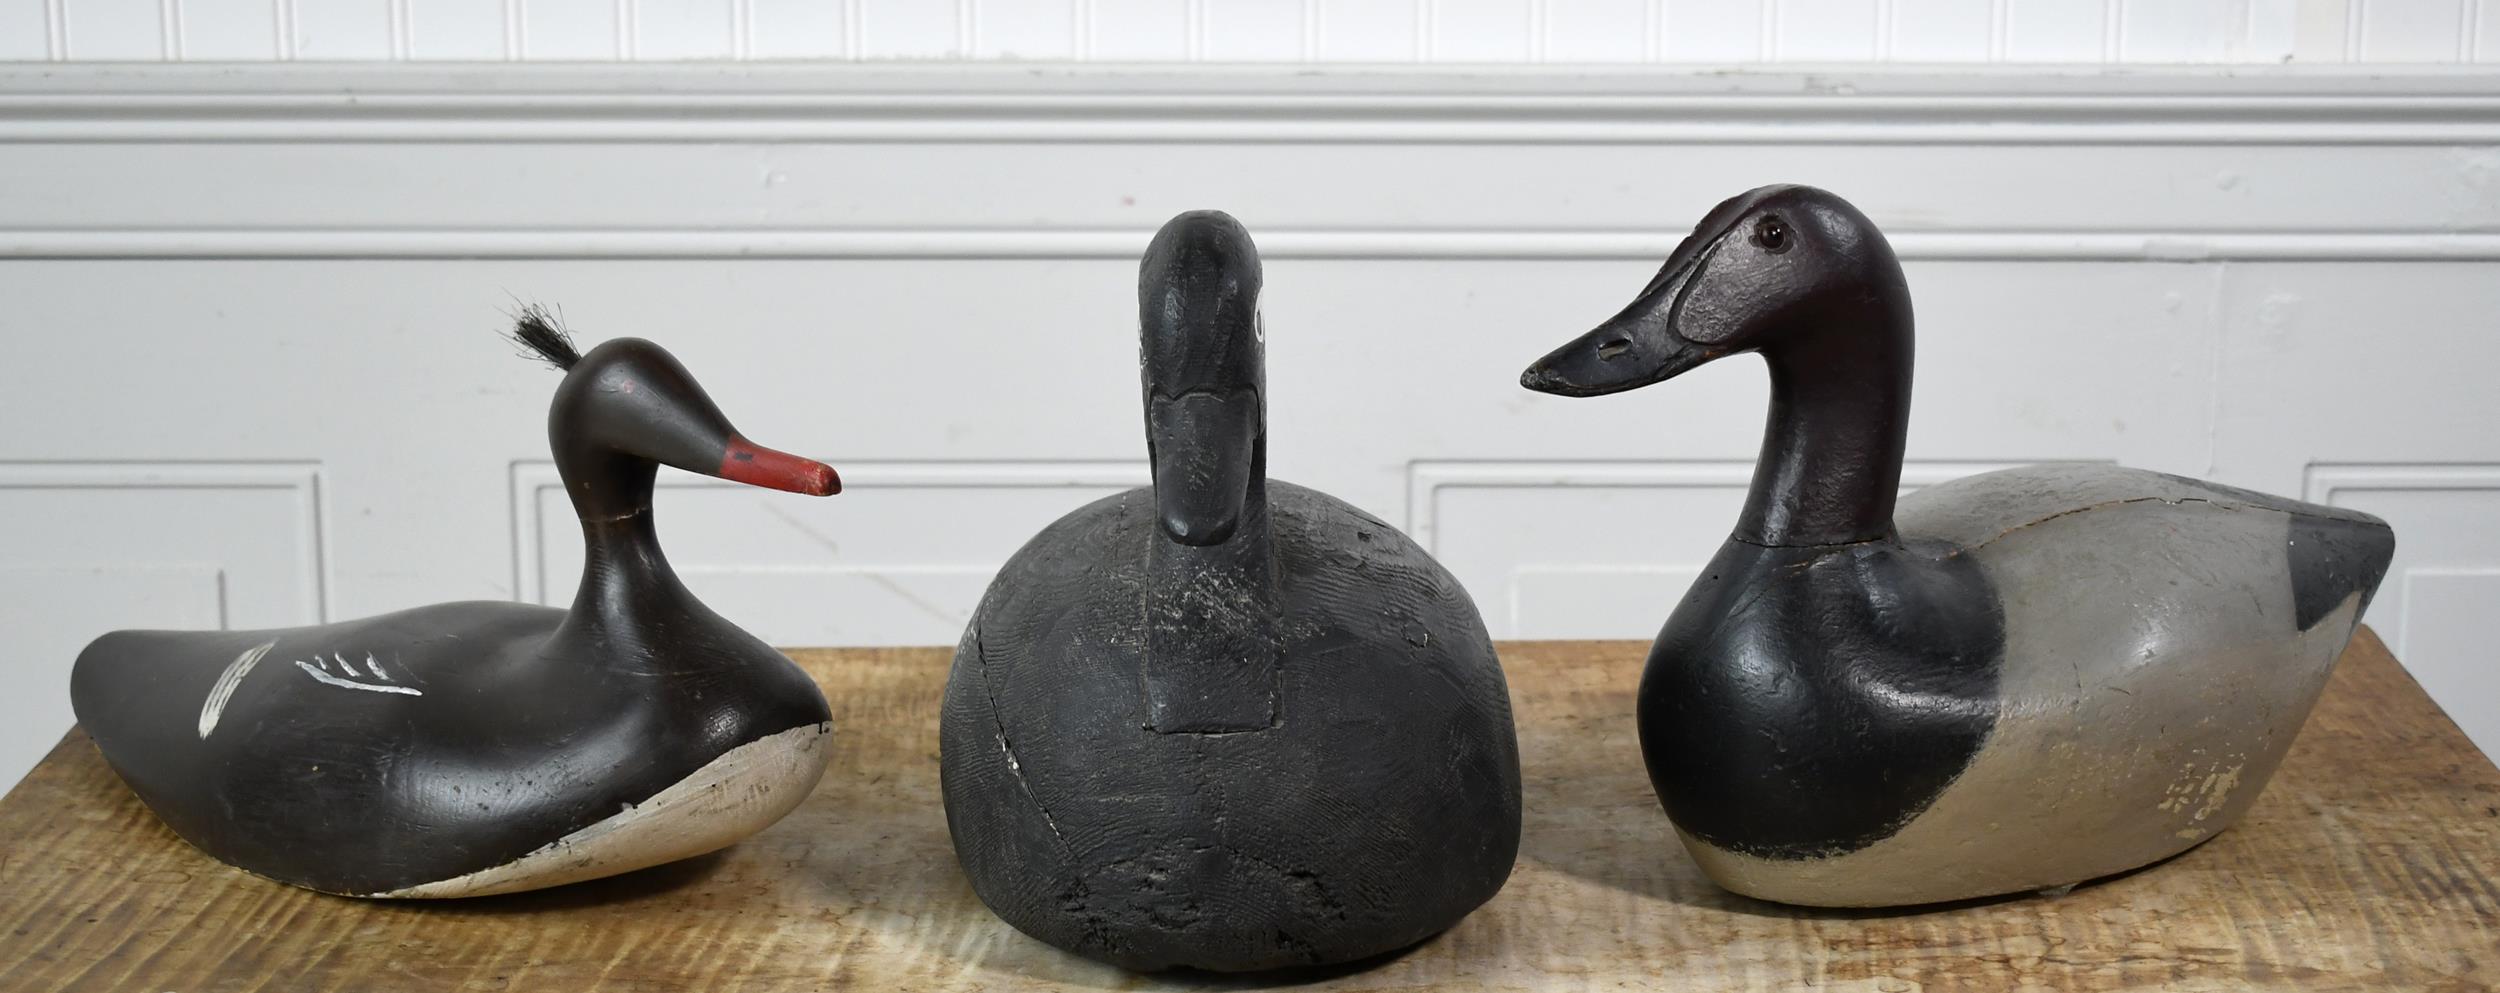 THREE VINTAGE DUCK DECOYS An early 307469